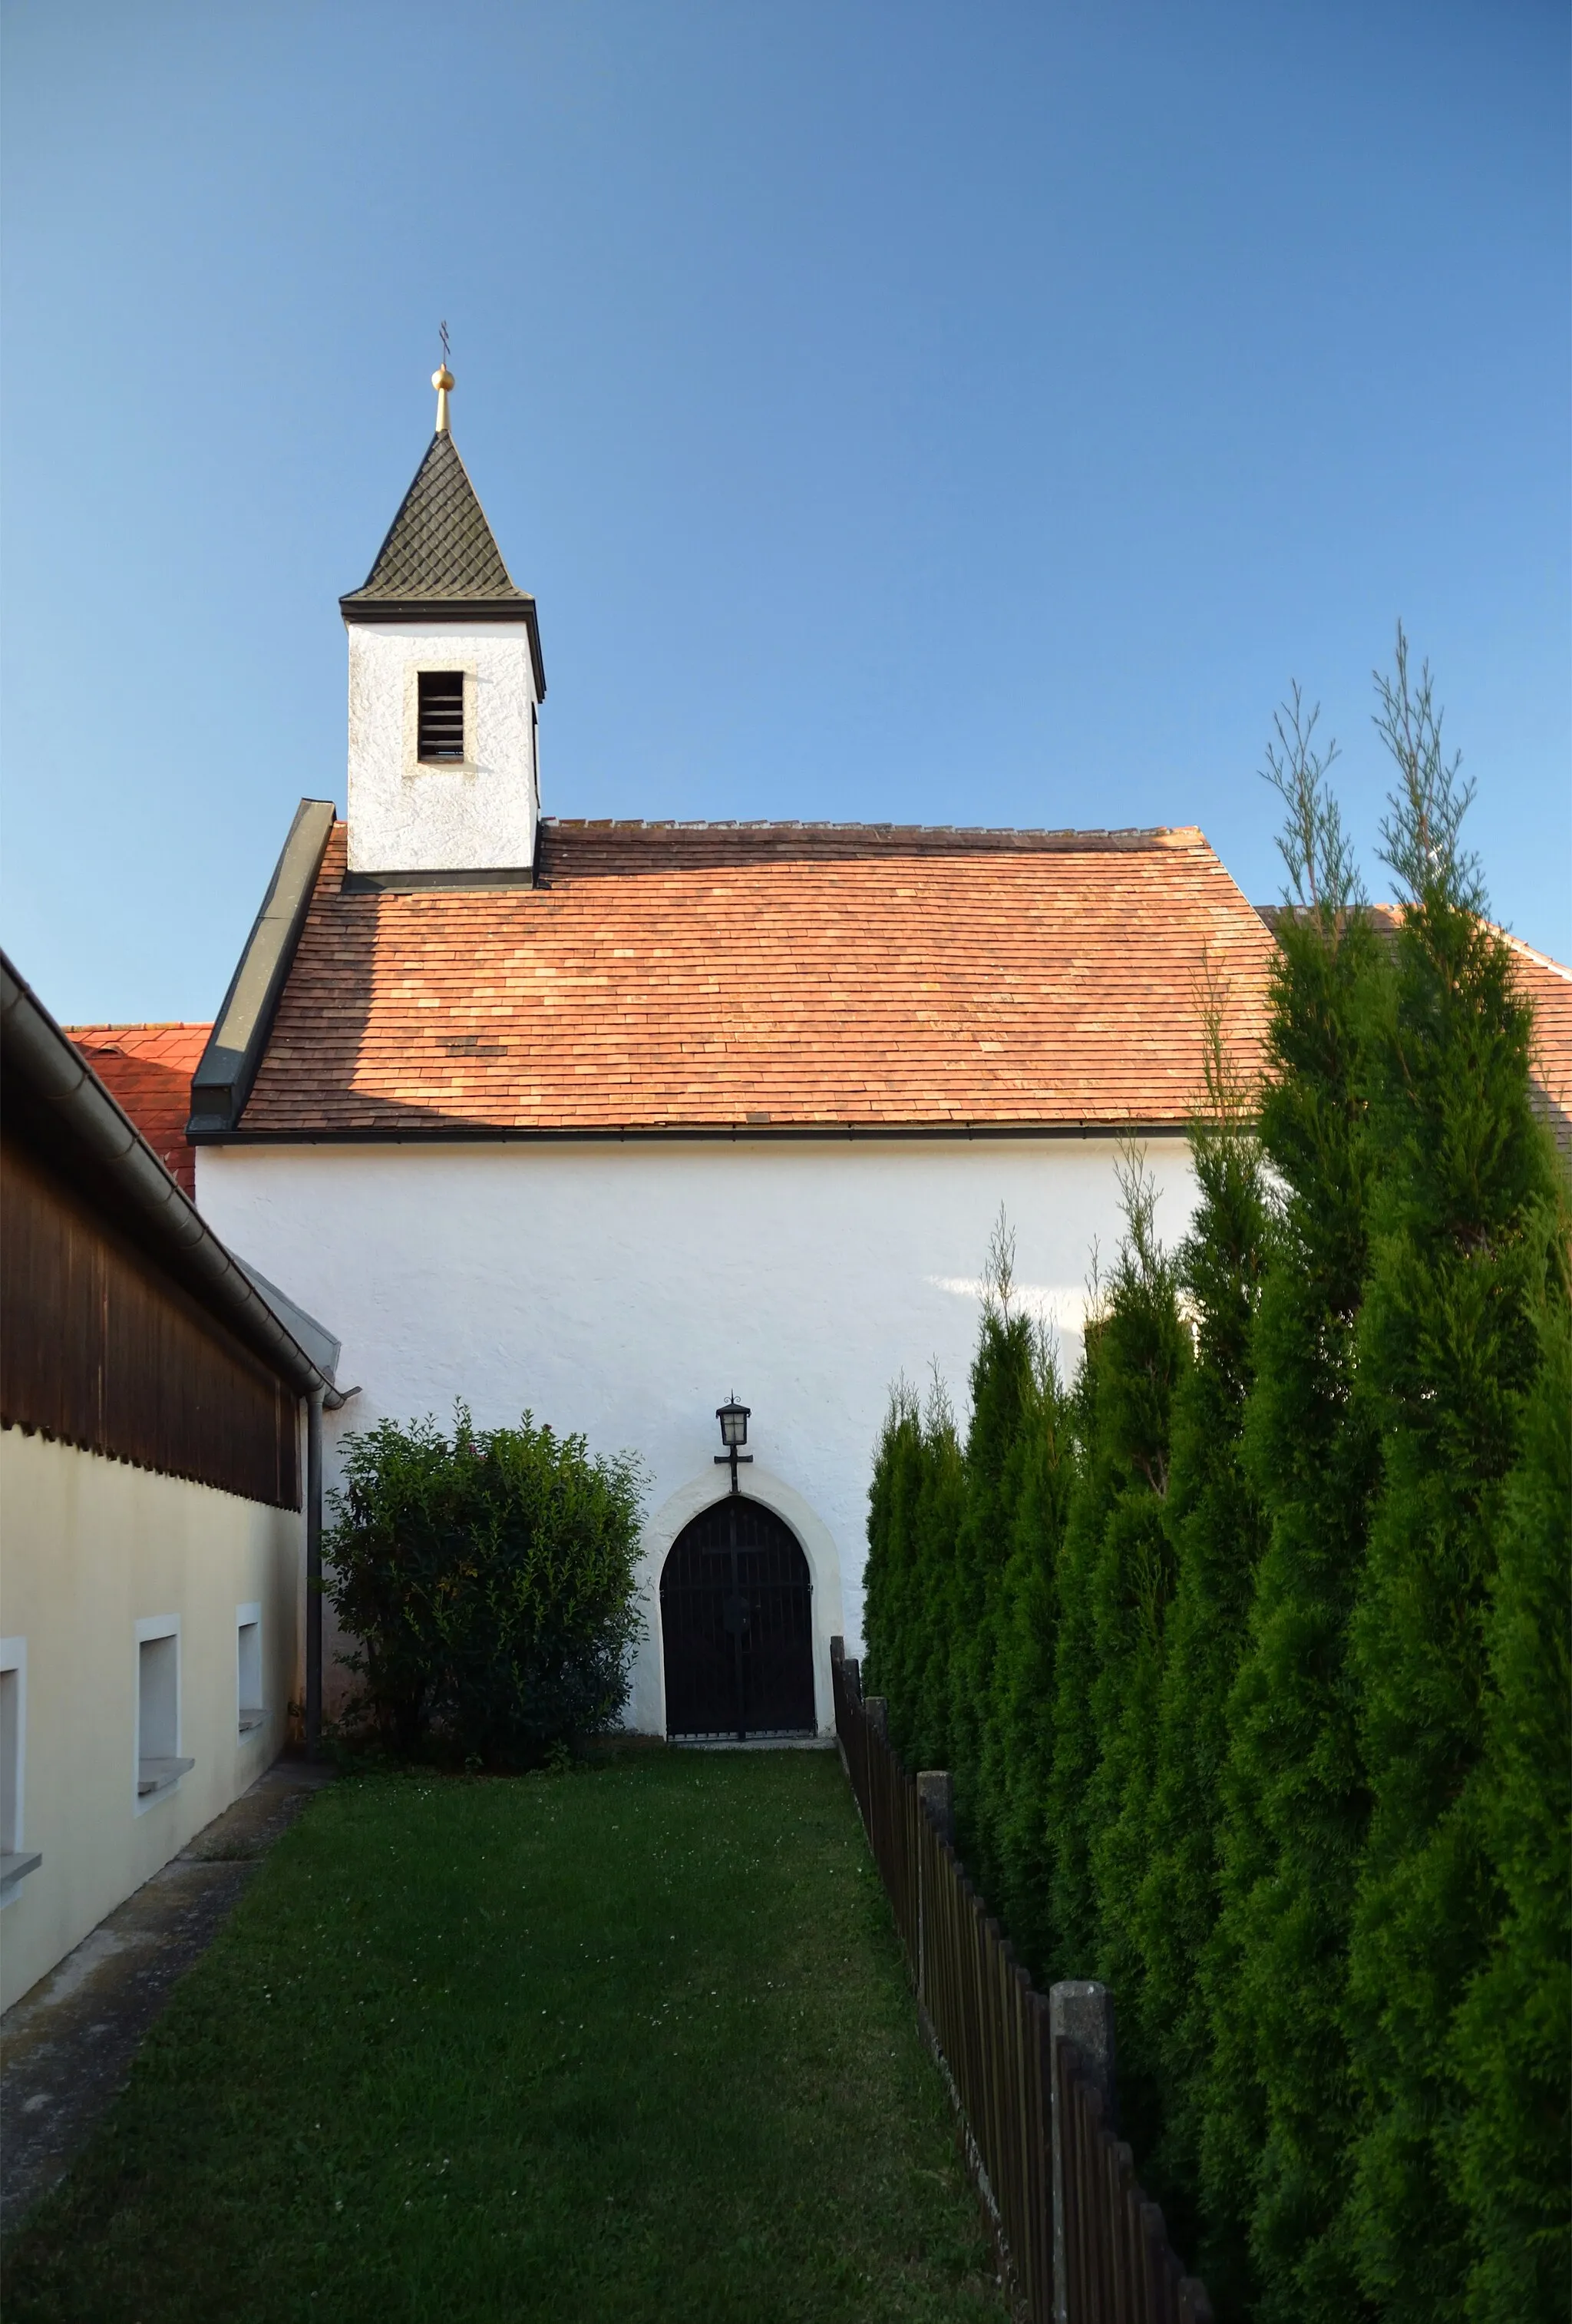 Photo showing: The subsidiary church Saint Nikolaus in Schildberg, municipality of Böheimkirchen, Lower Austria, is protected as a cultural heritage monument.